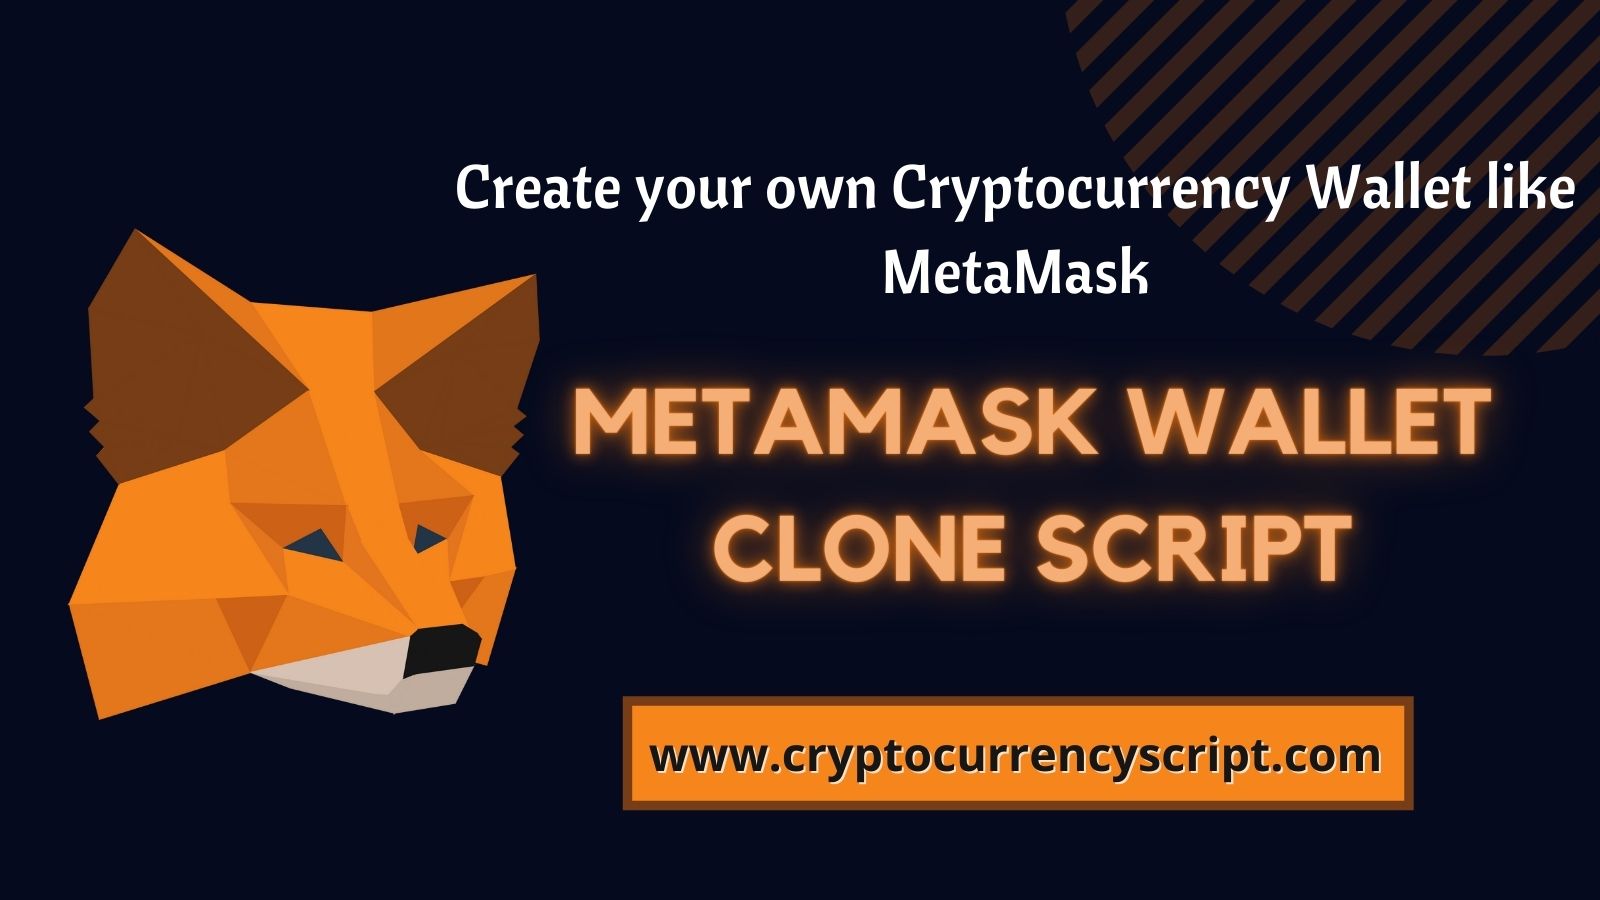 MetaMask Wallet Clone Script: A Secure Crypto Wallet Solution!